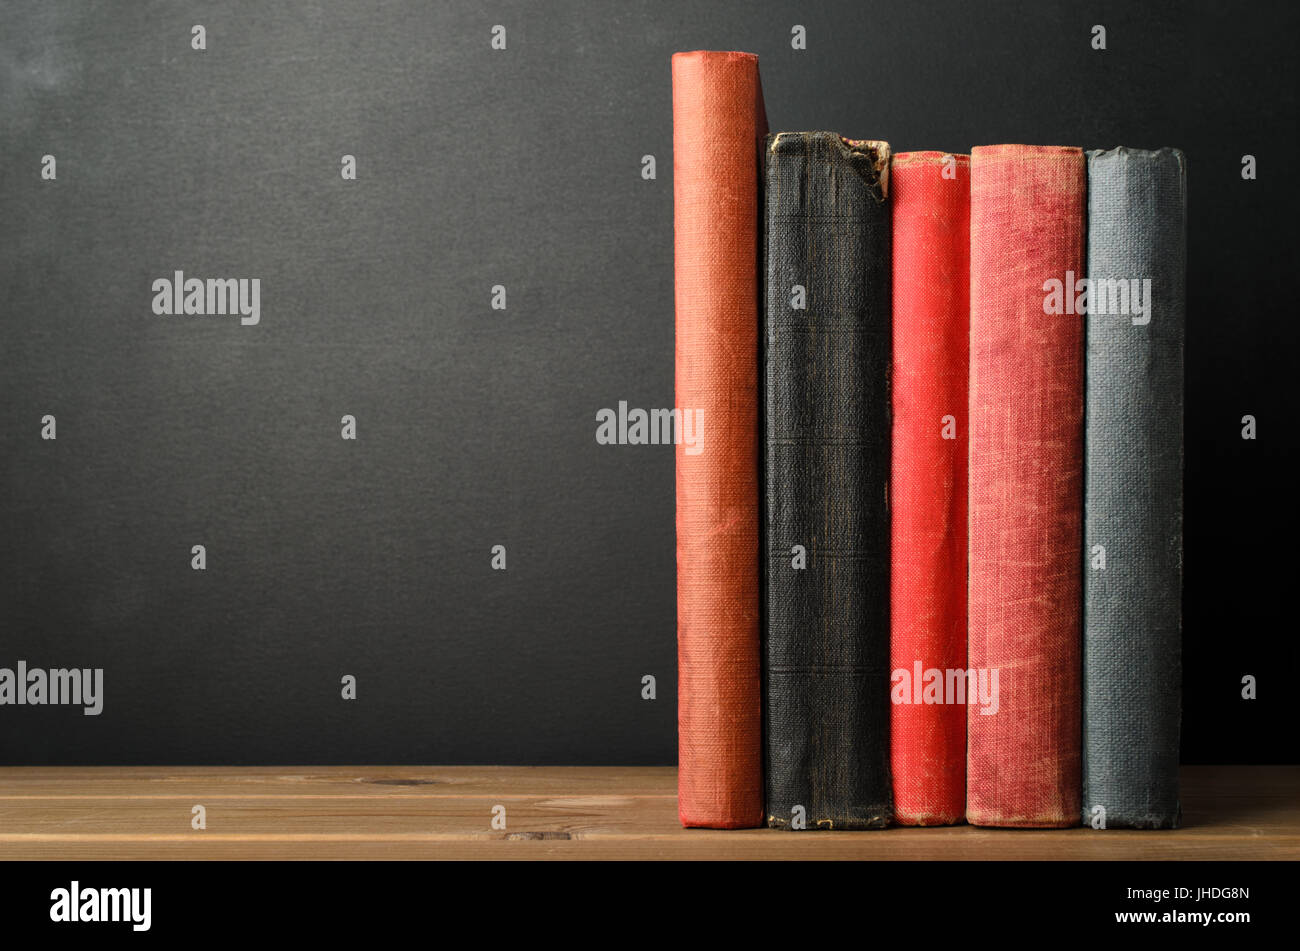 A row of upright books with blank spines at eye level on wood planked desk with black chalkboard background; providing copy space to left. Stock Photo